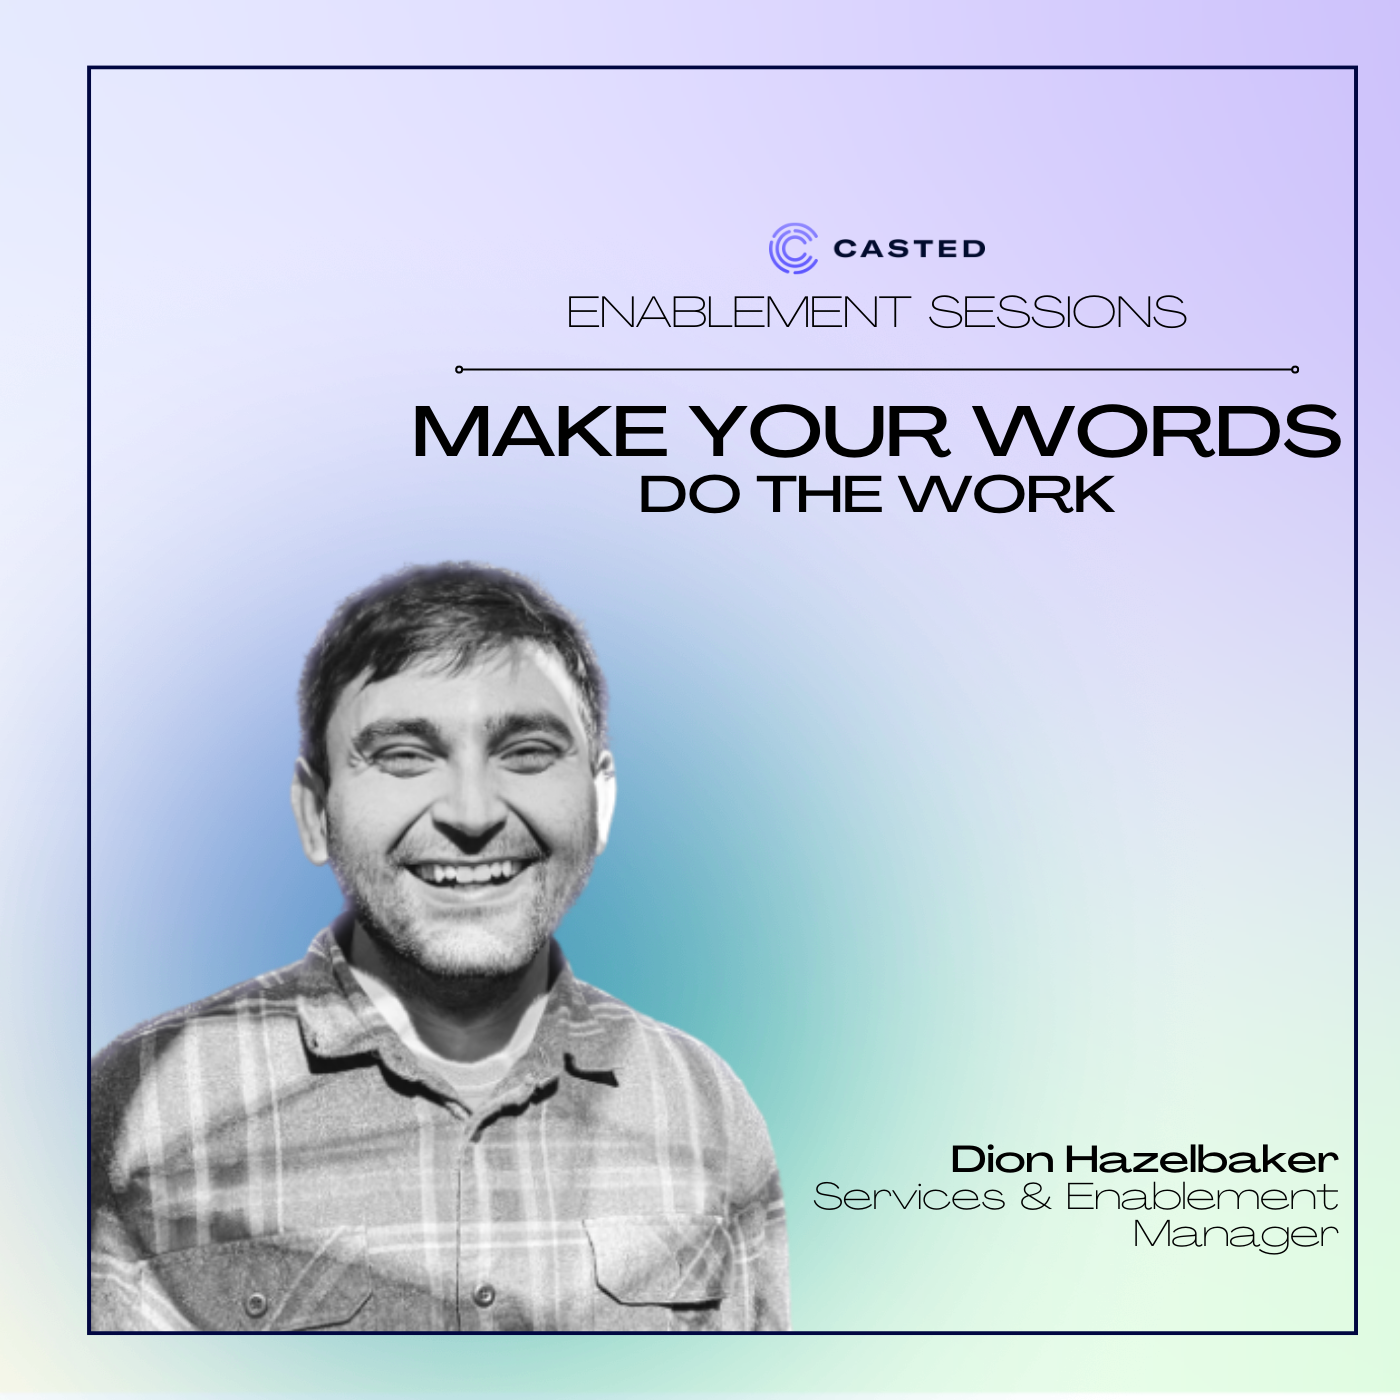 Make Your Words Do The Work with Dion Hazelbaker | Enablement Session #1